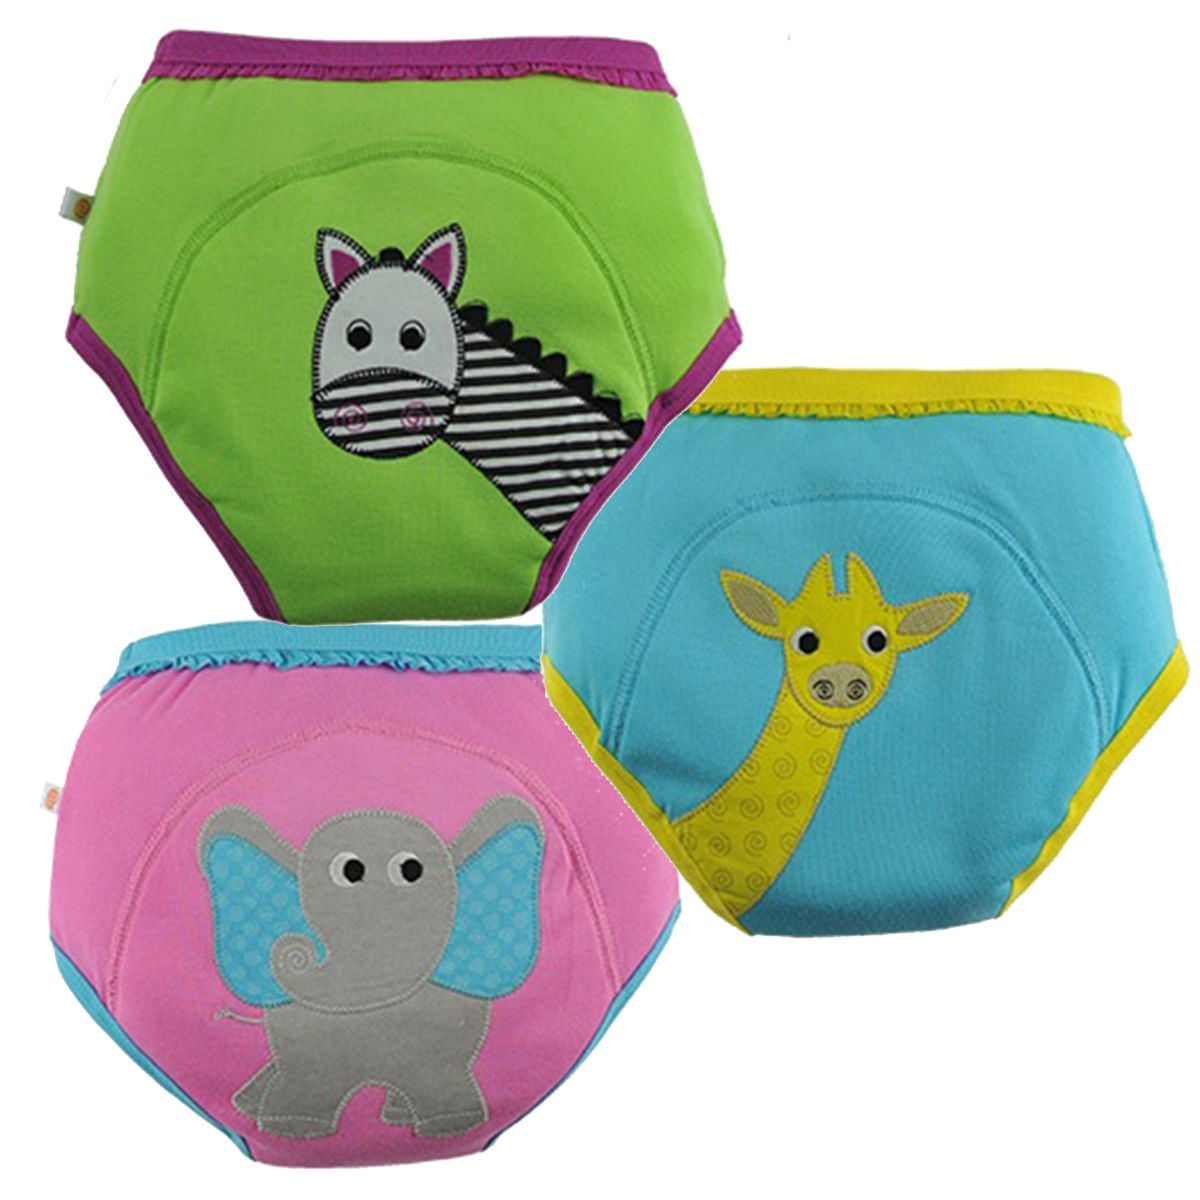 Organic Cotton Girls Underwear, in 'funny Creatures', 2 Pack of